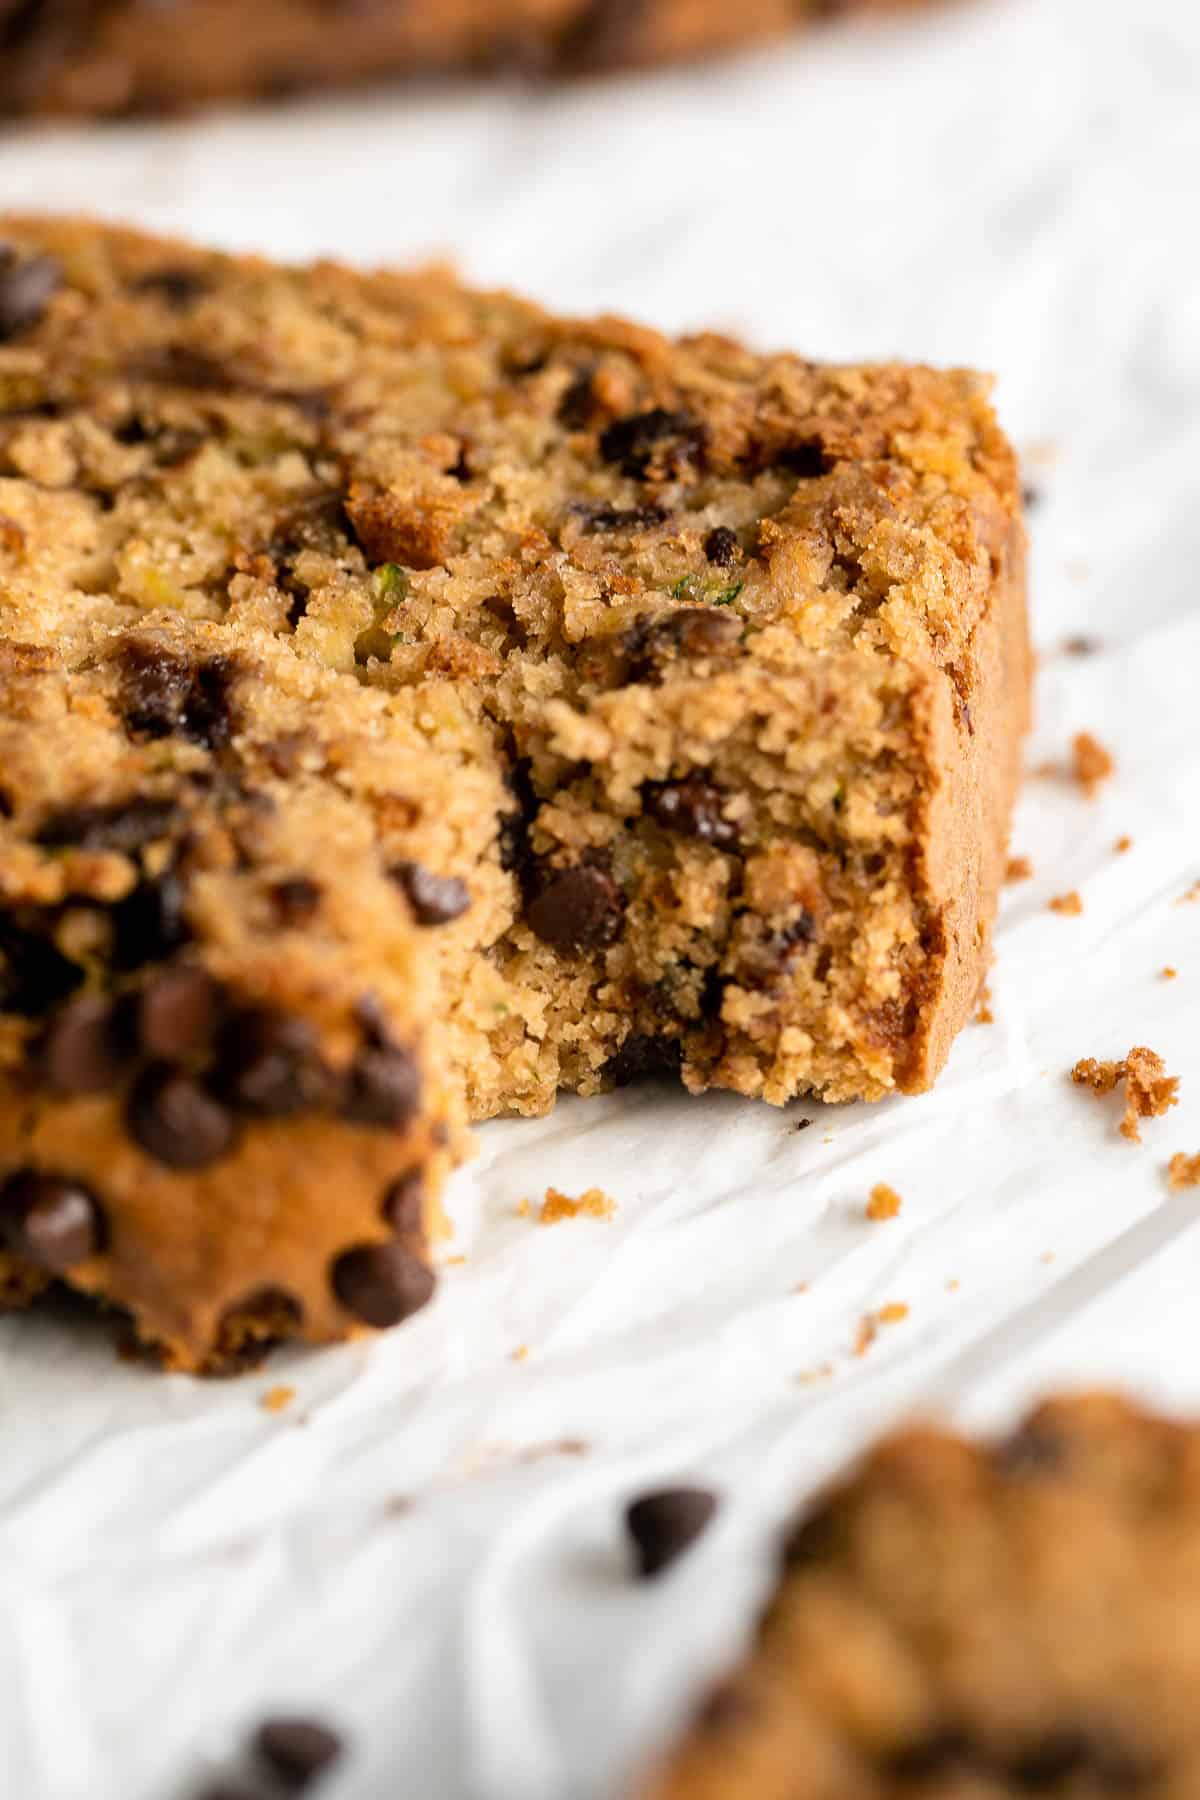 up close image of the gluten free zucchini bread with a bite taken out to show texture